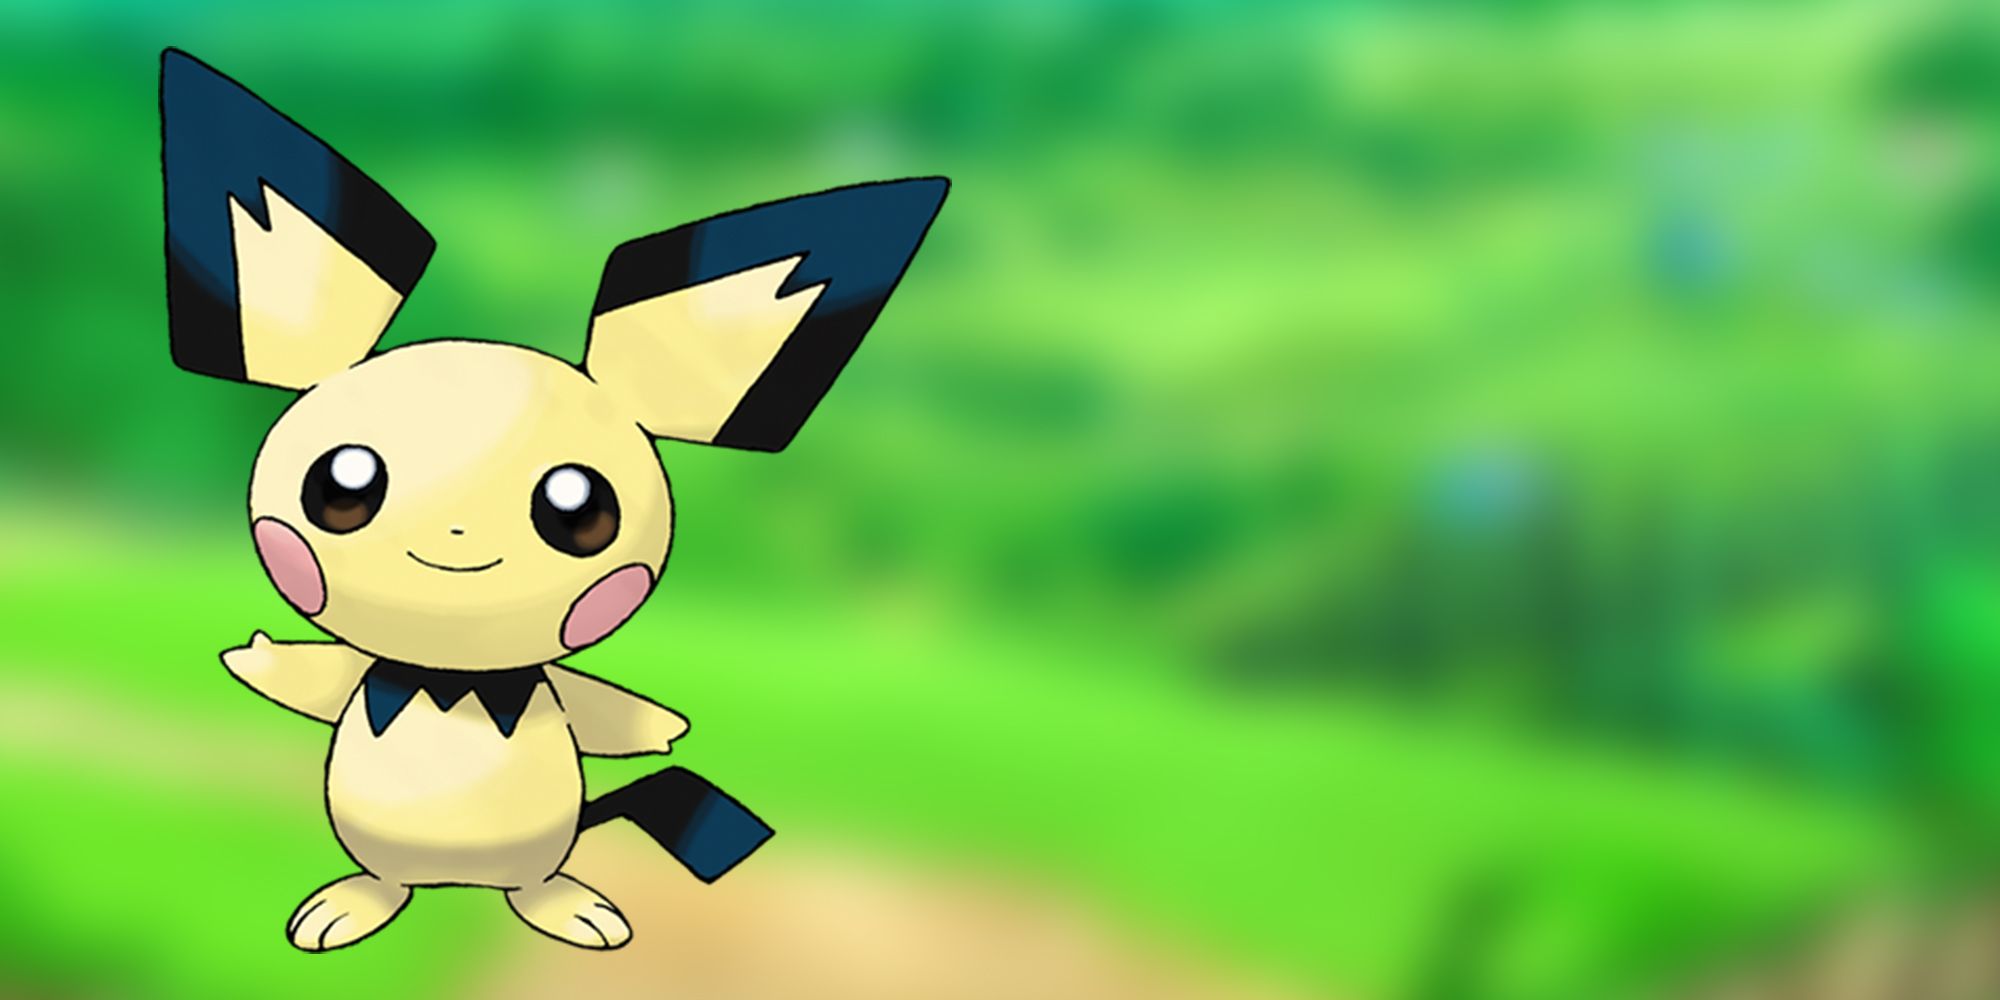 Pichu Posed Over a Blurred Background